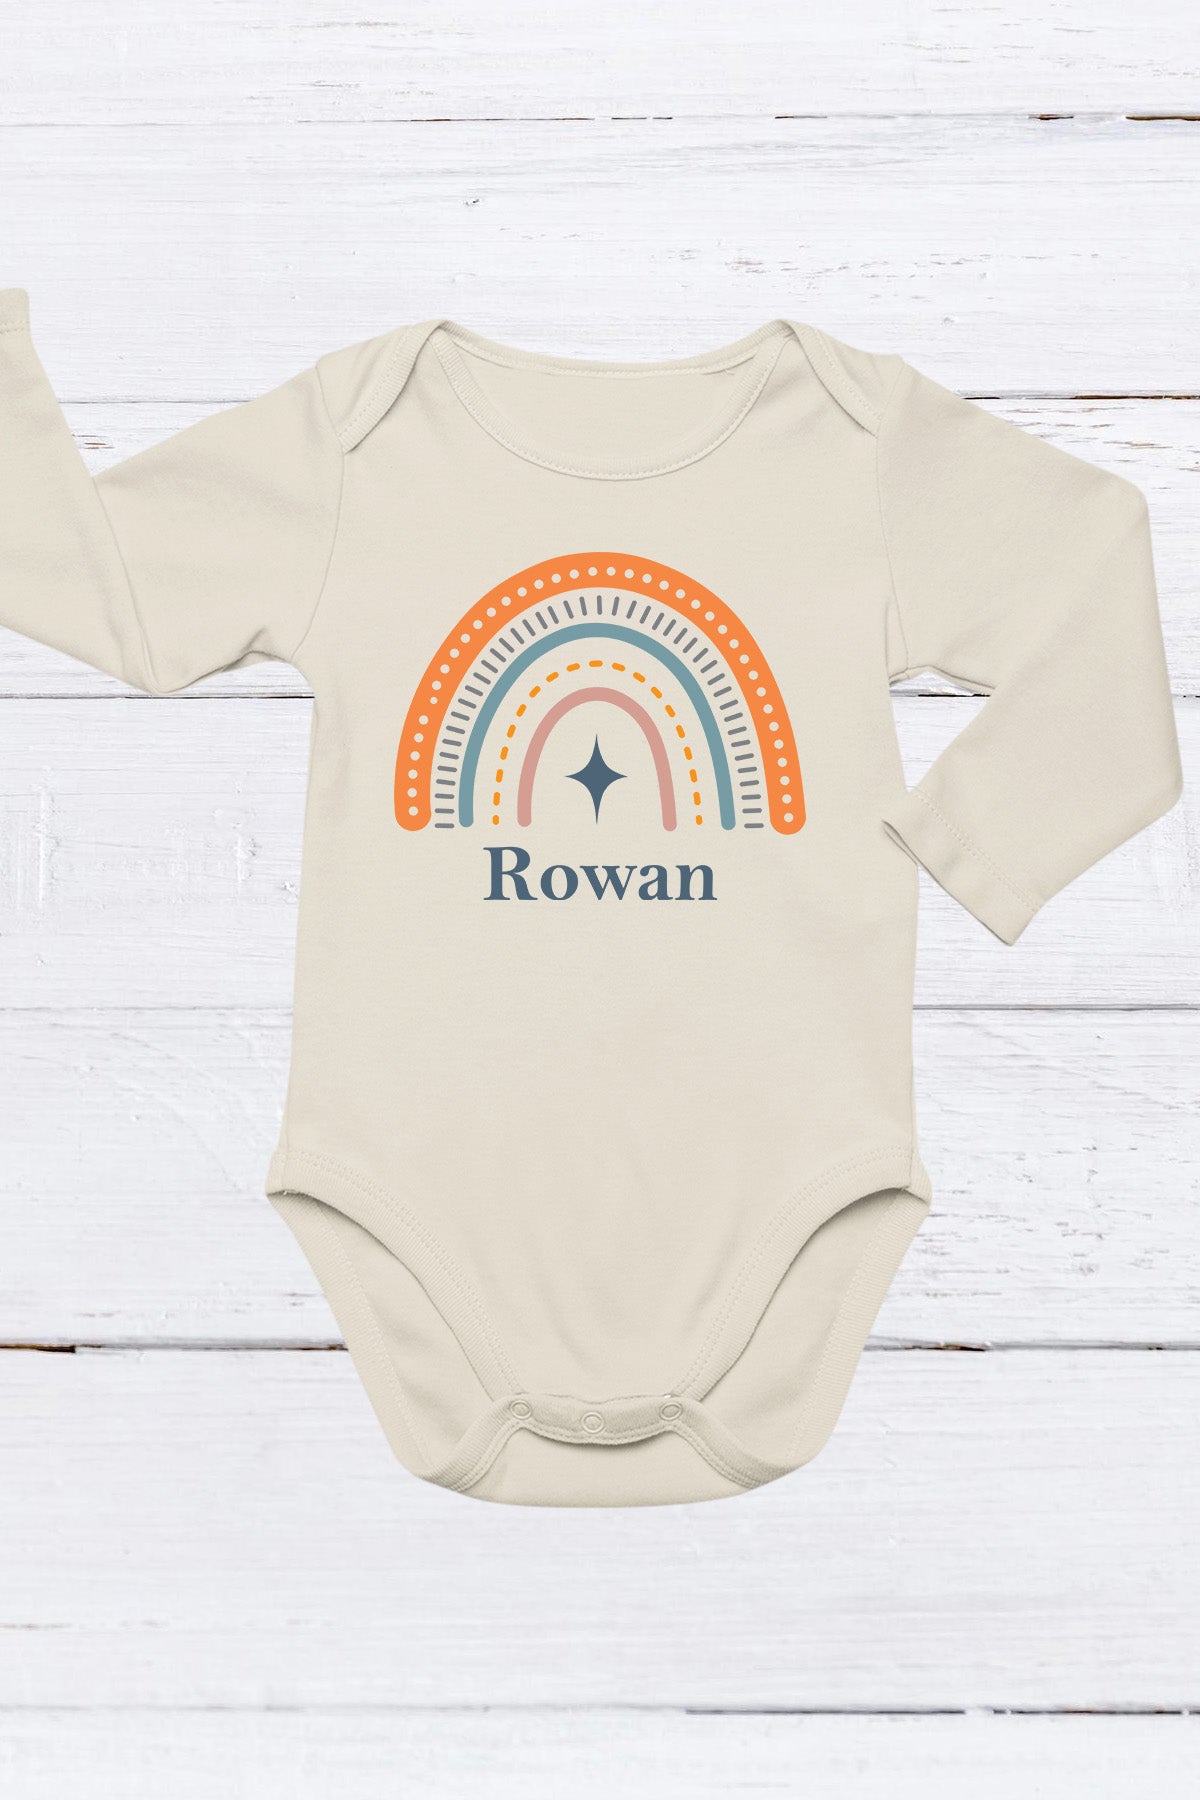 Personalized Baby Name With Rainbow Bodysuit